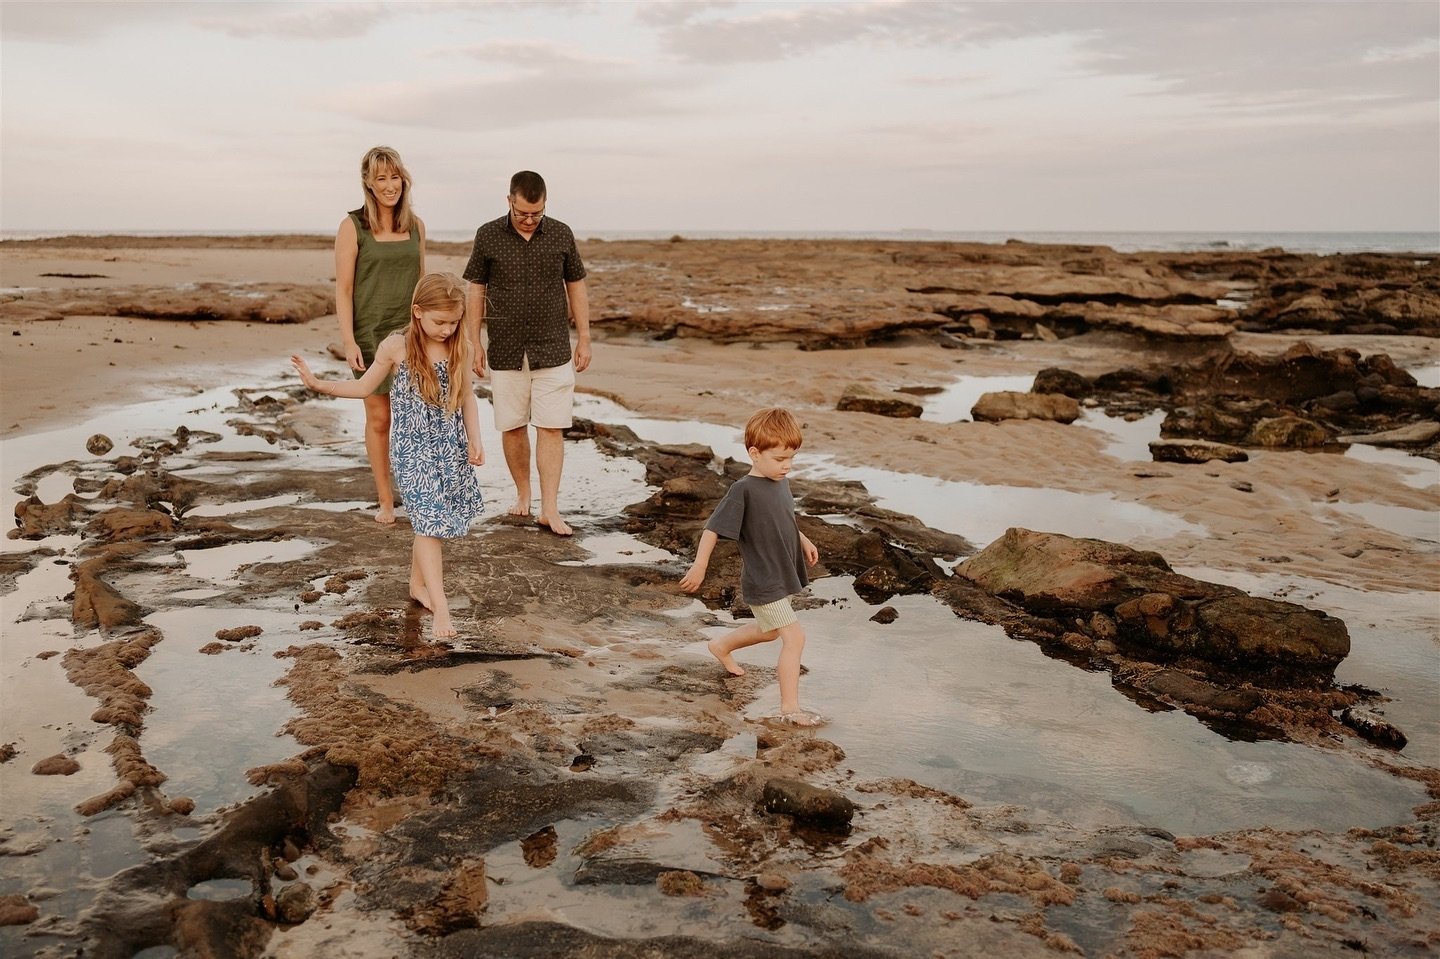 Exploring rock pools, finding treasures and creating memories. 

Sunset family sessions that are relaxed, playful and capture the heart of your family.